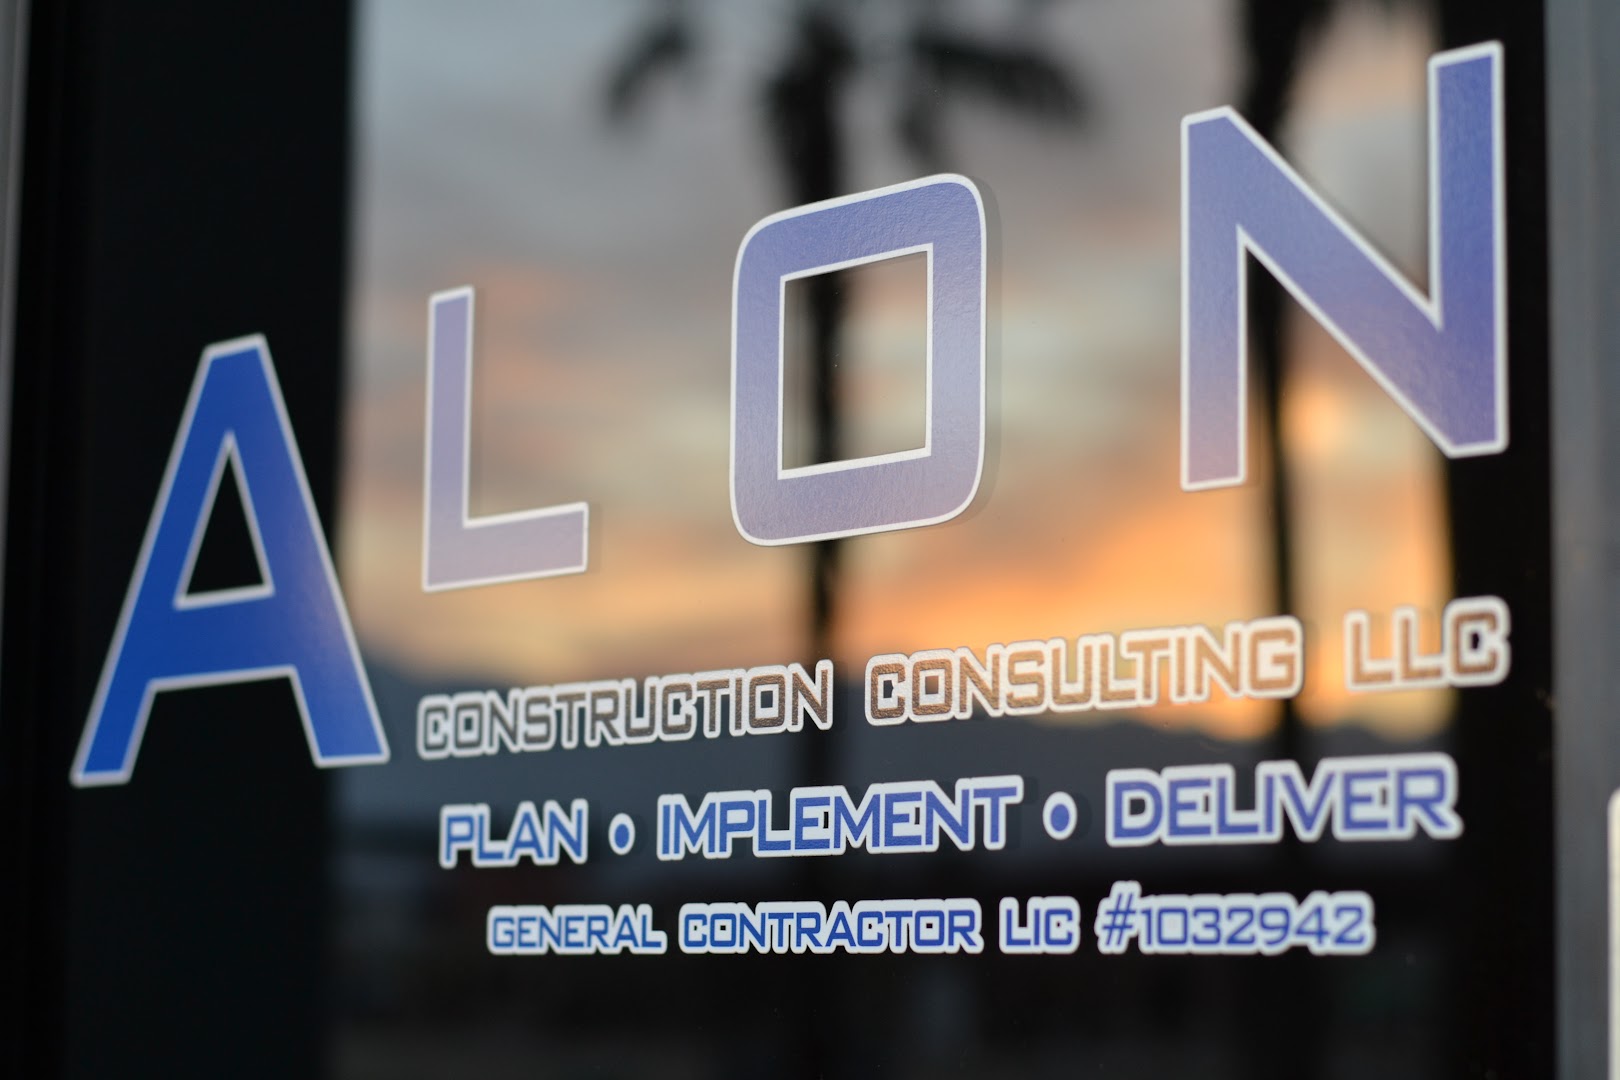 Alon Construction Consulting